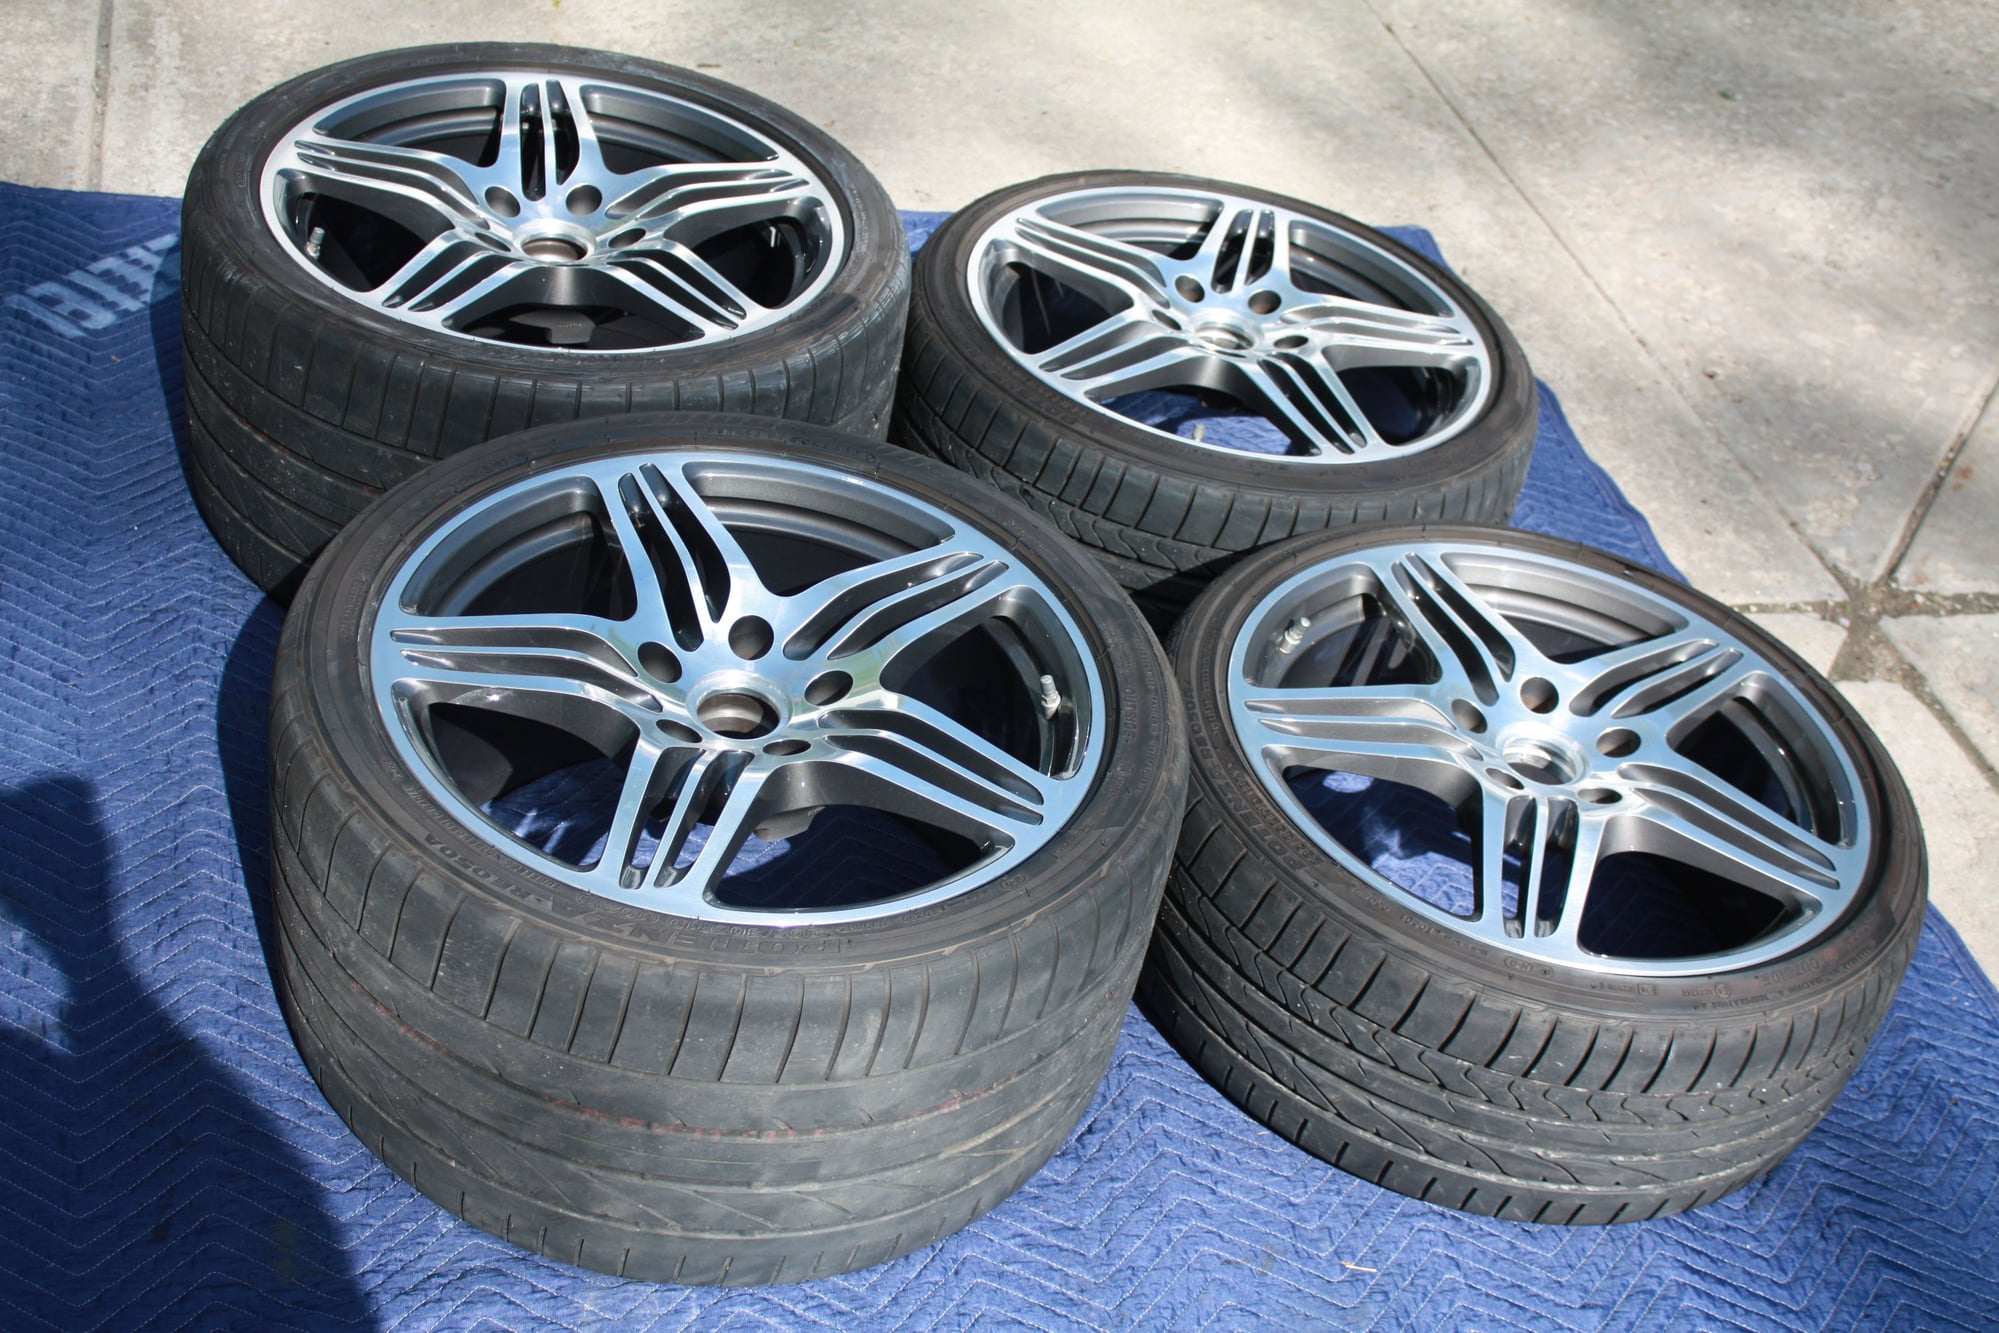 Wheels and Tires/Axles - 997 Turbo Wheels and Tires - Used - 2007 Porsche 911 - Pewaukee, WI 53072, United States